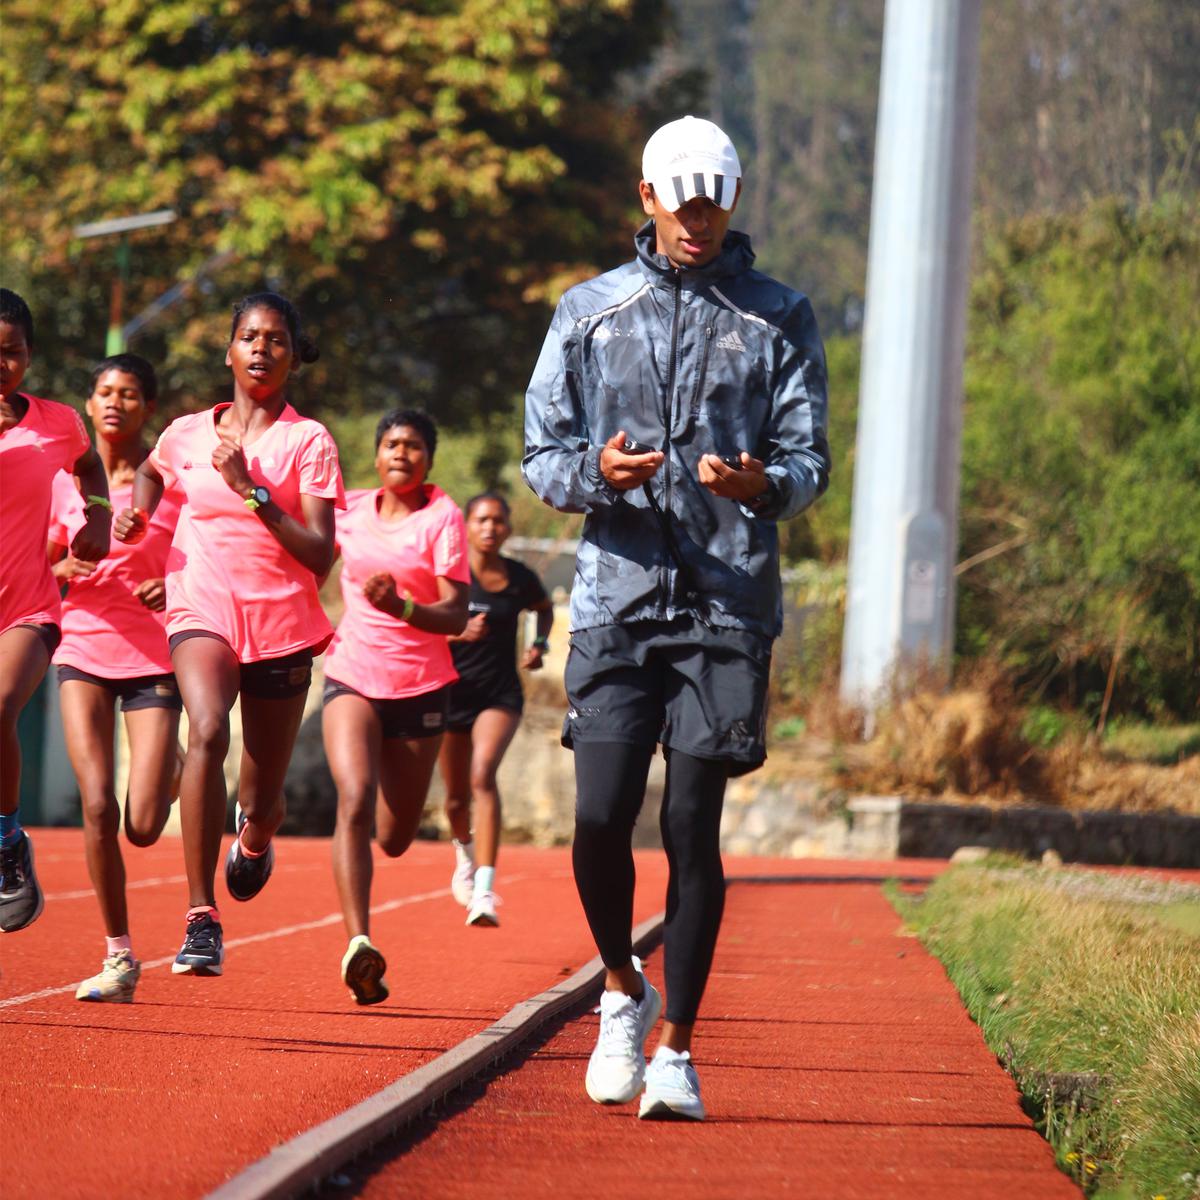 Karan Singh with his athletes in training at the Indian Track Foundation